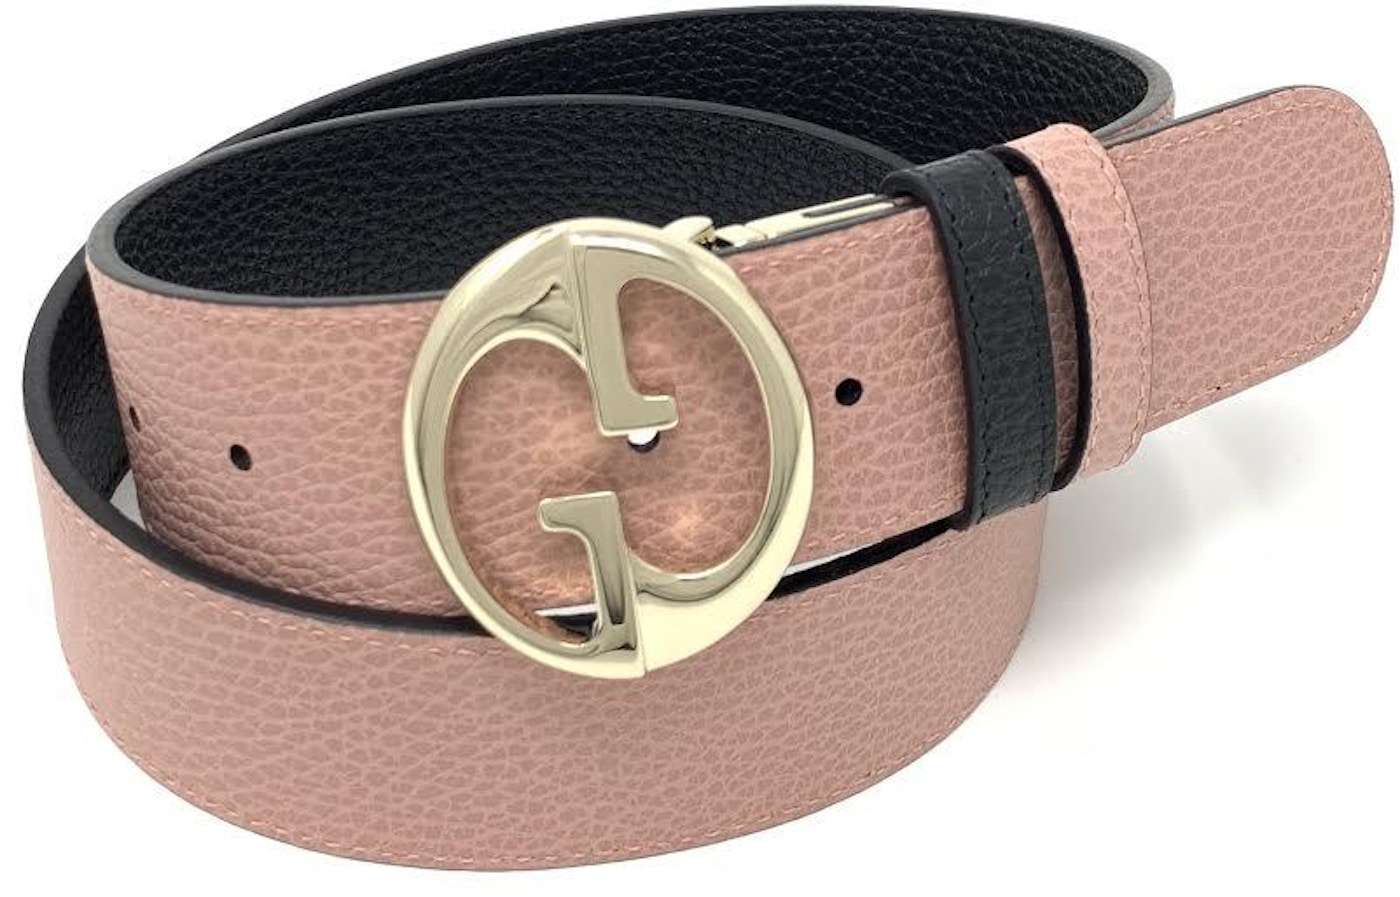 Gucci Interlocking G Reversible Belt 1.55W Black/Pink in Leather with Gold-tone